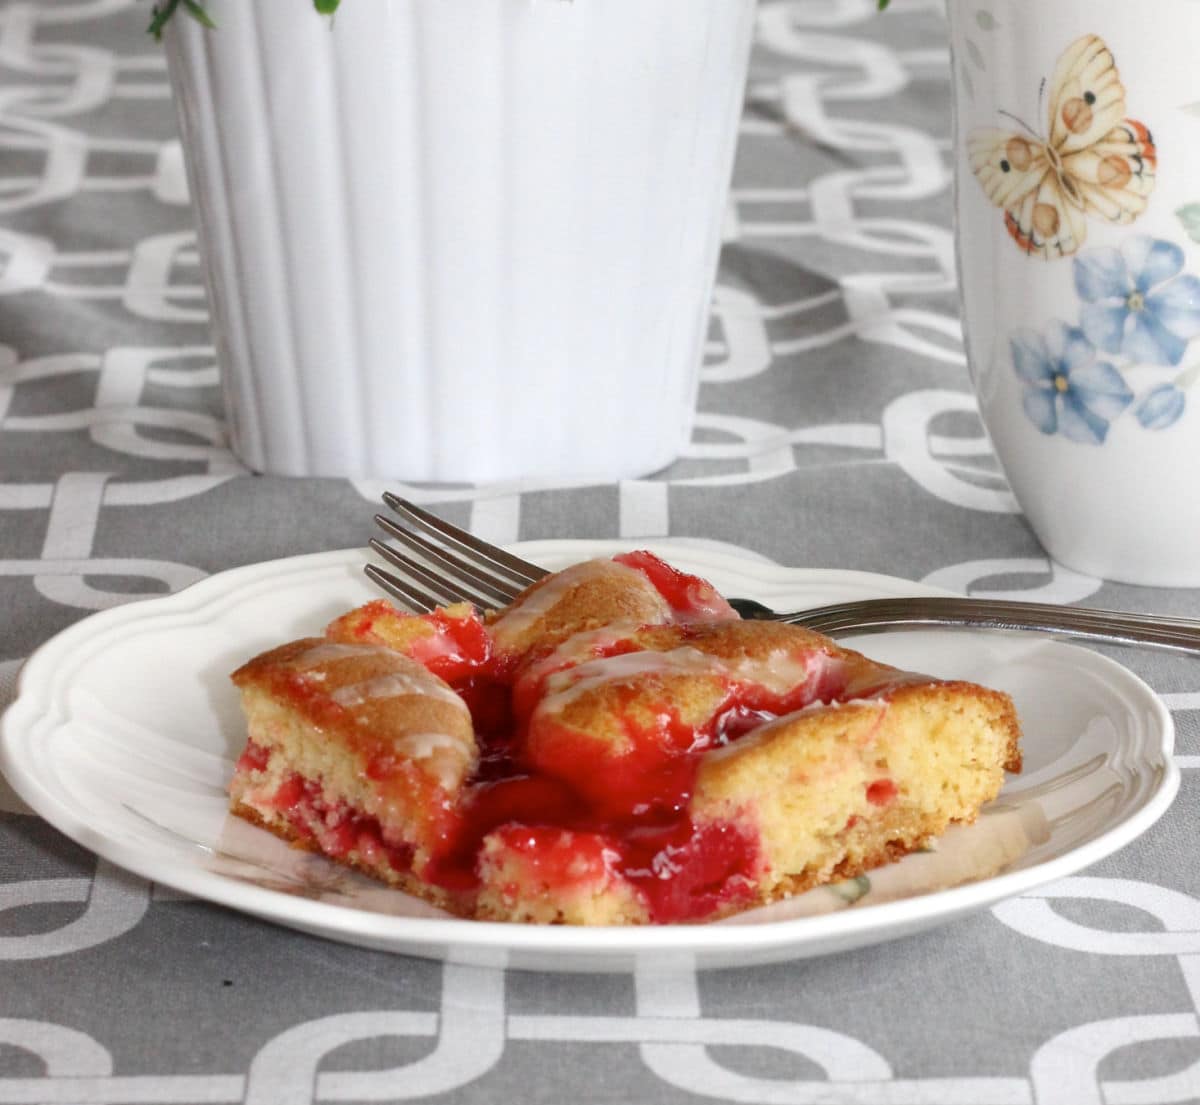 cherry pie square on a table with a gray table cloth and a cup of tea.